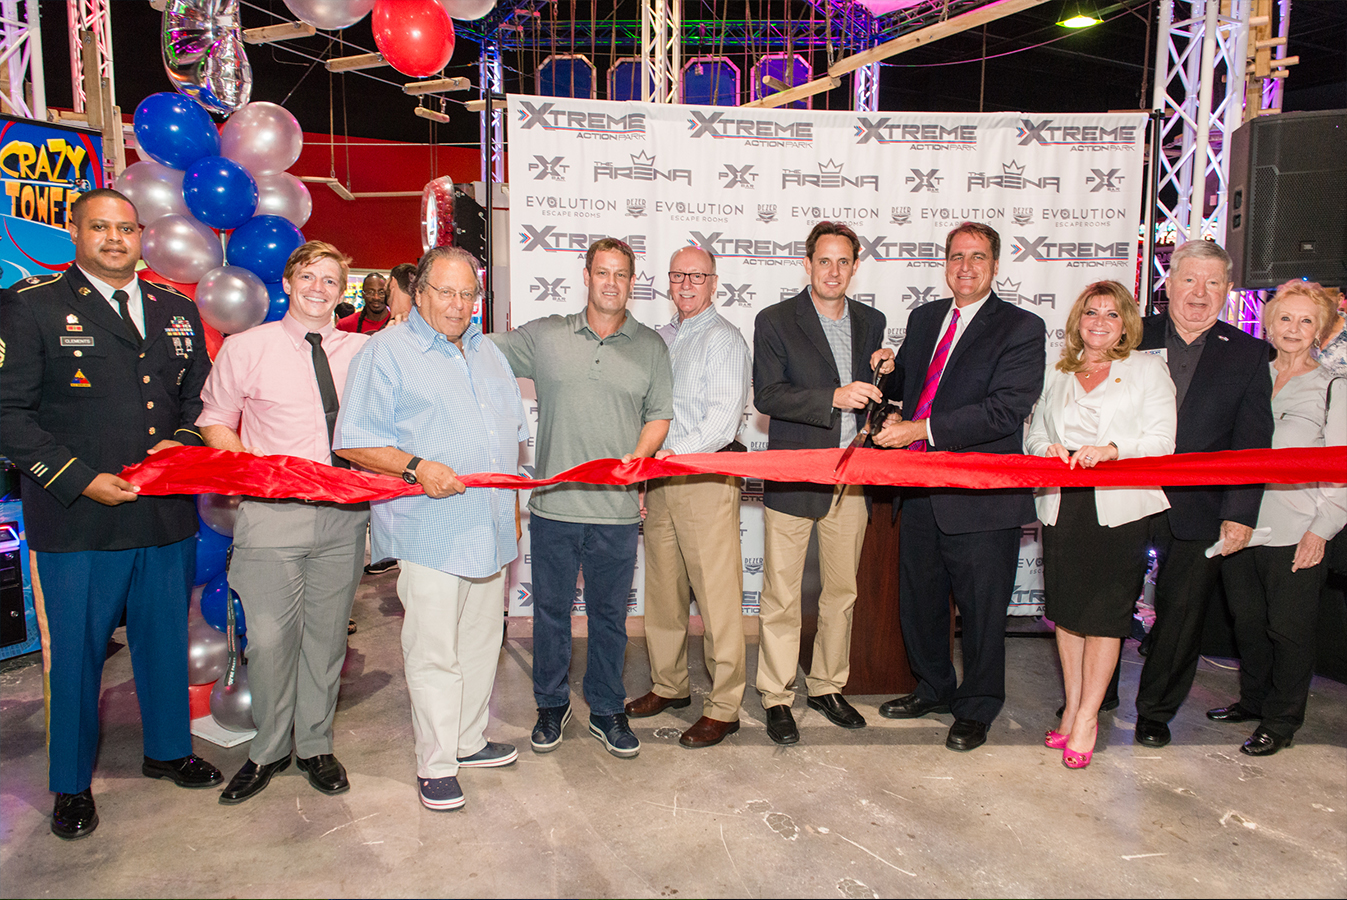 It’s Official!  We are the Largest Indoor Entertainment Venue in Florida